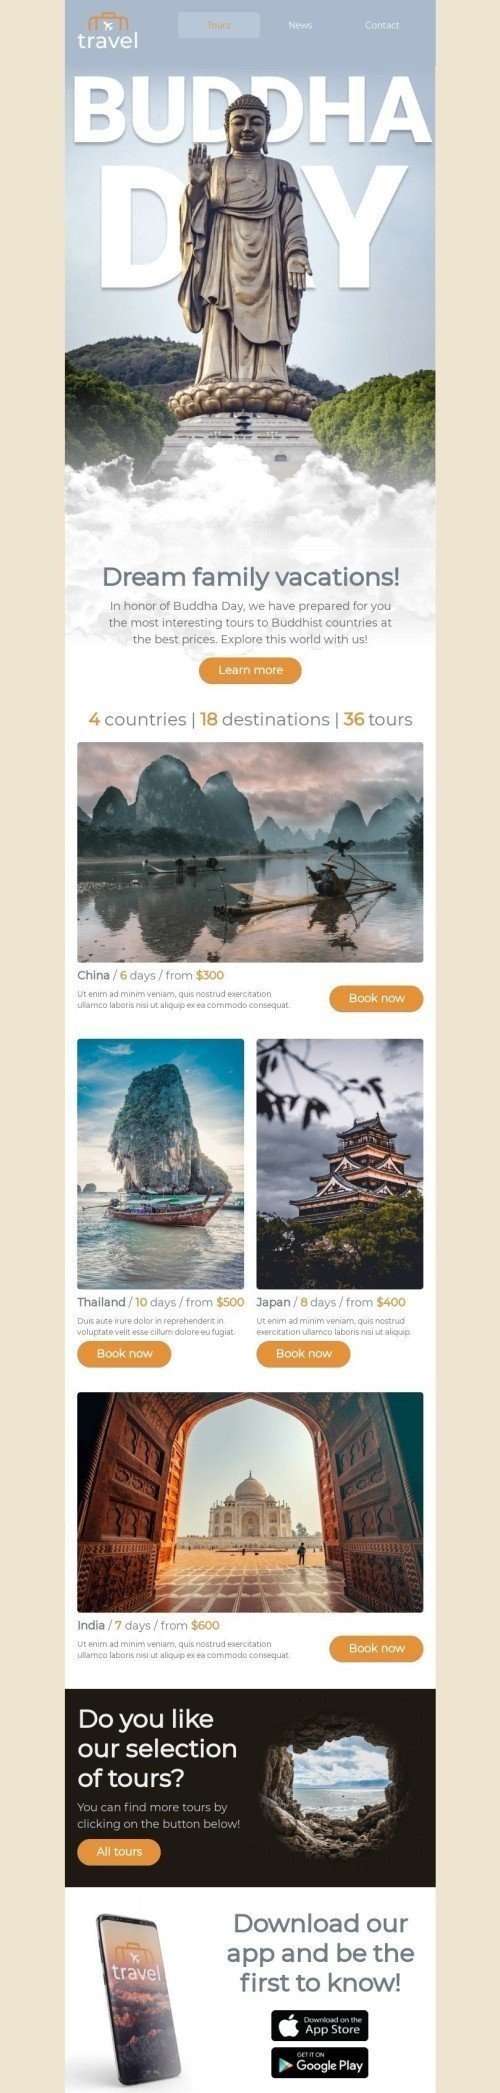 Buddha day Email Template «Dream family vacations» for Travel industry mobile view